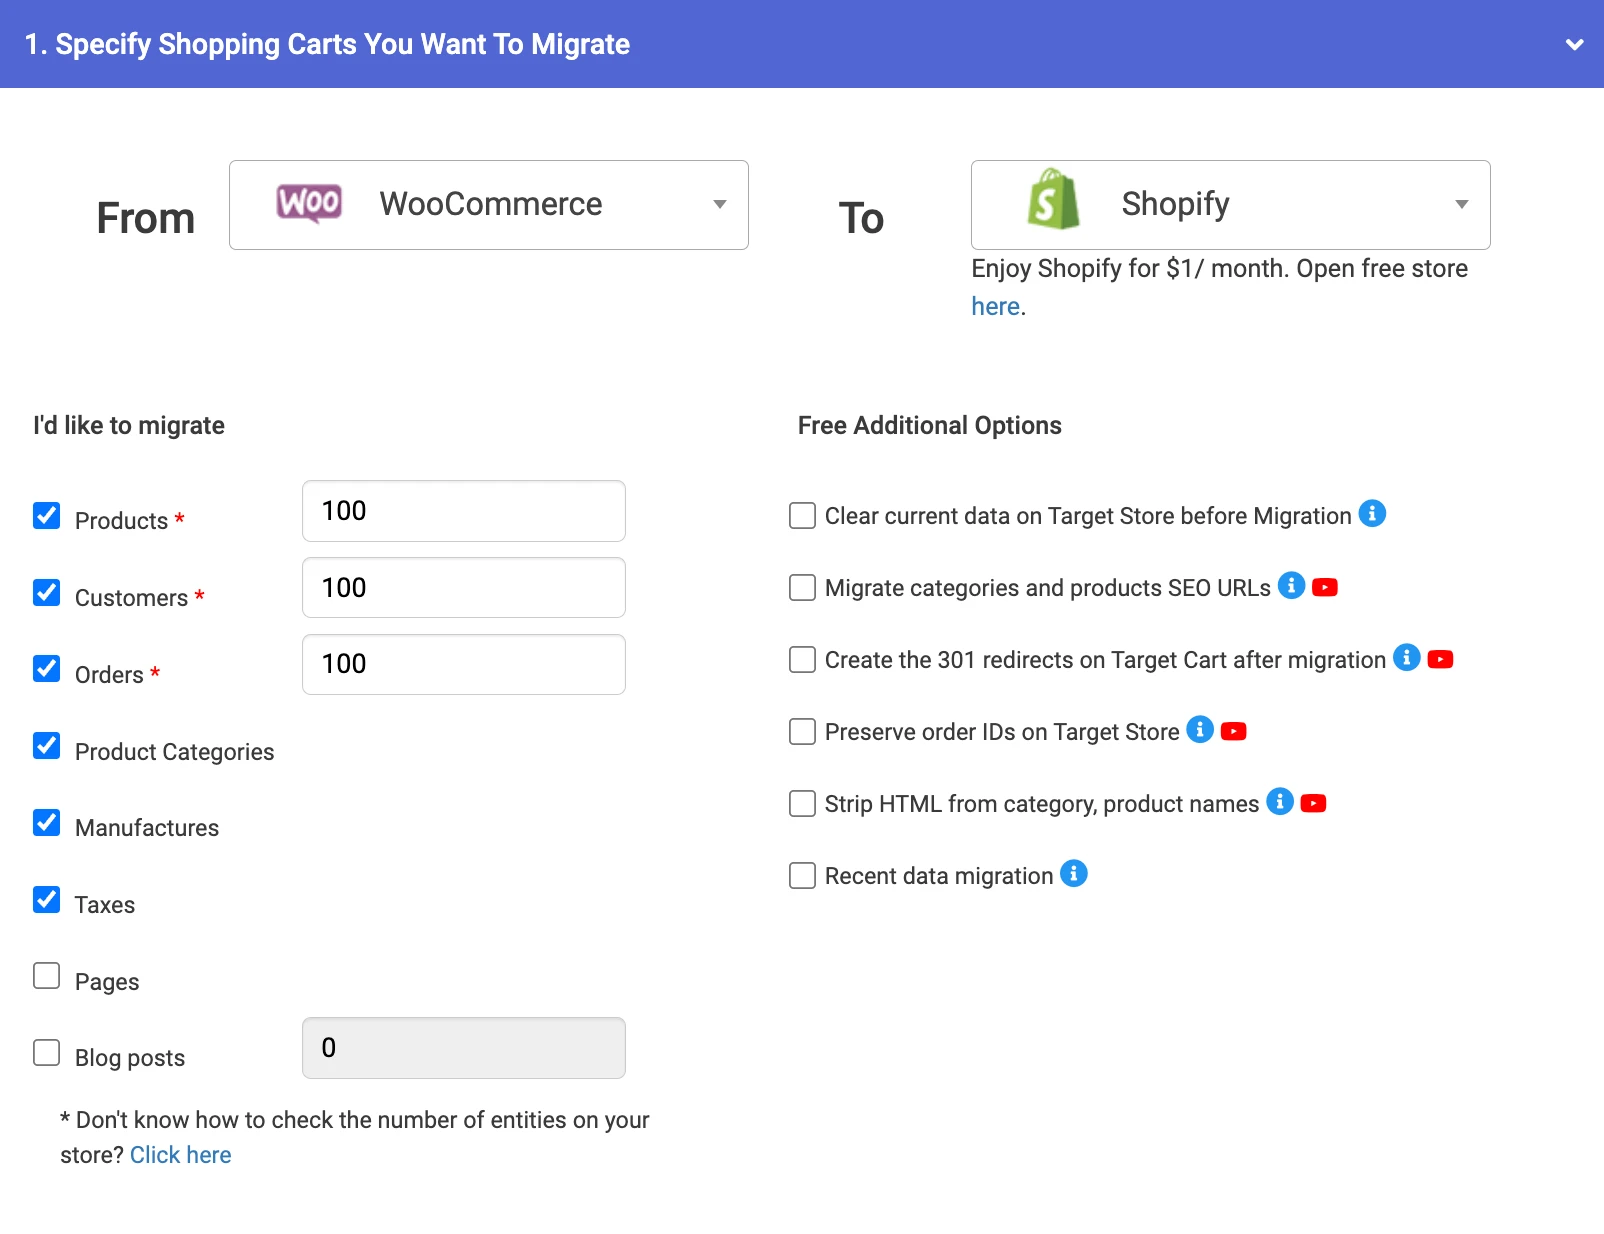 Choose the entities you want to migrate from WooCommerce to Shopify Plus